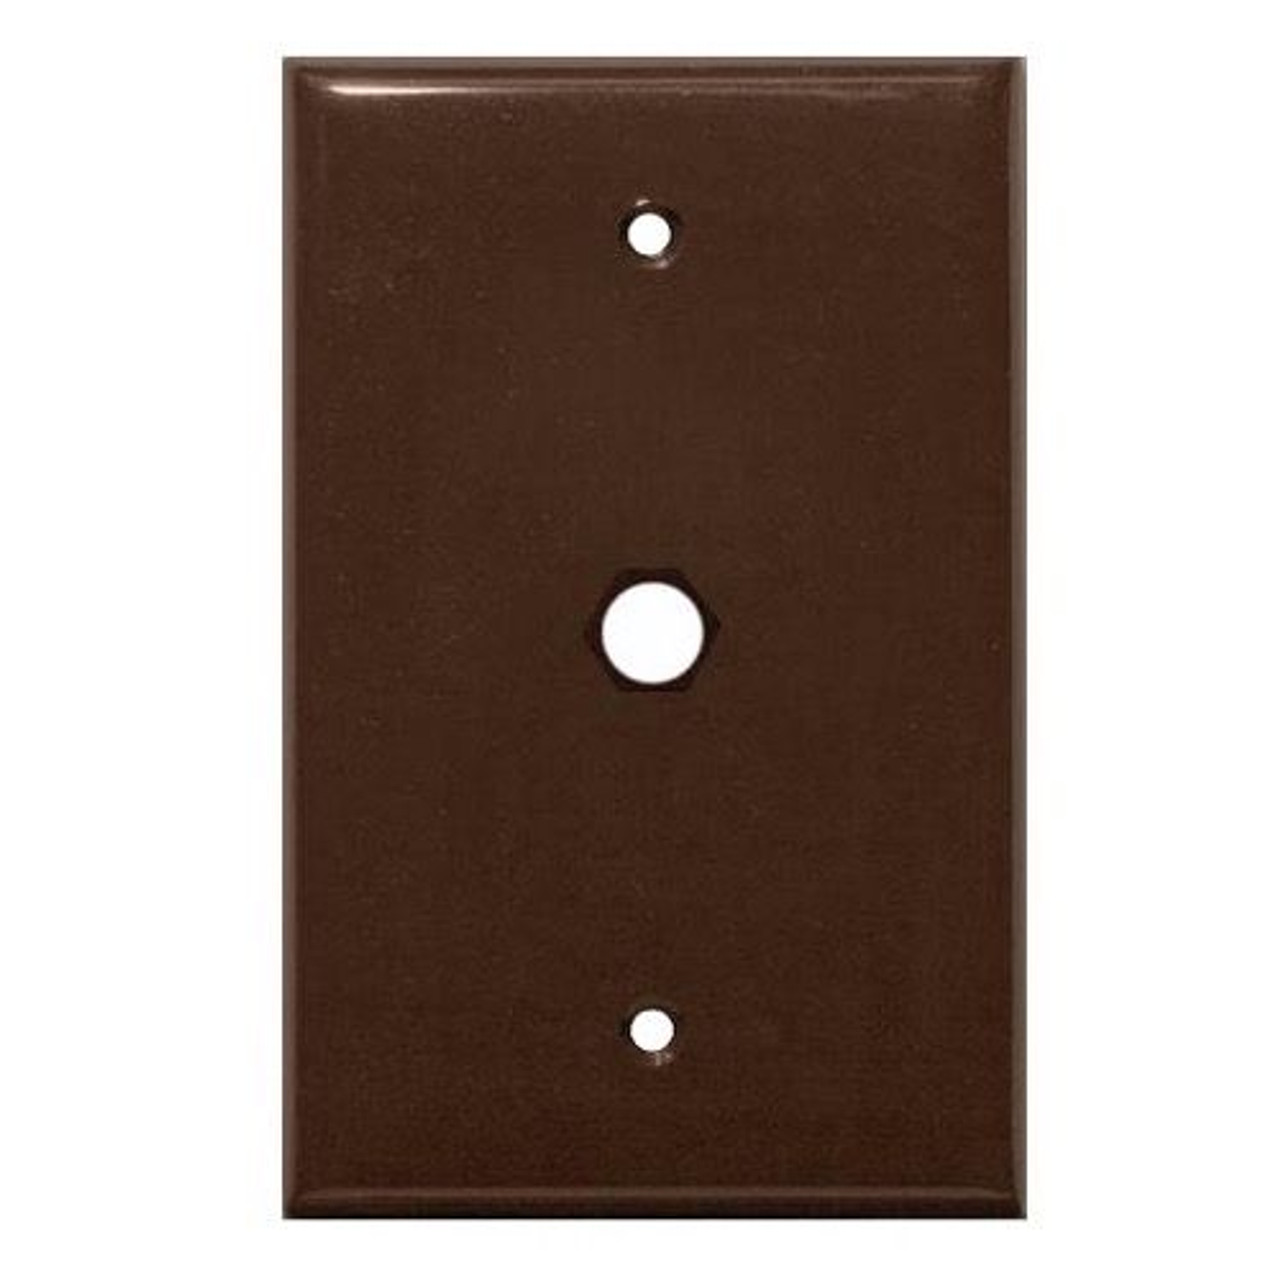 Eagle Wall Plate Blank Brown Single Gang Connector Hole Cable Coax Audio Video Data Signal 75 Ohm Plug Connector Nylon Flush Mount Outlet Cover with Hole for Hardware